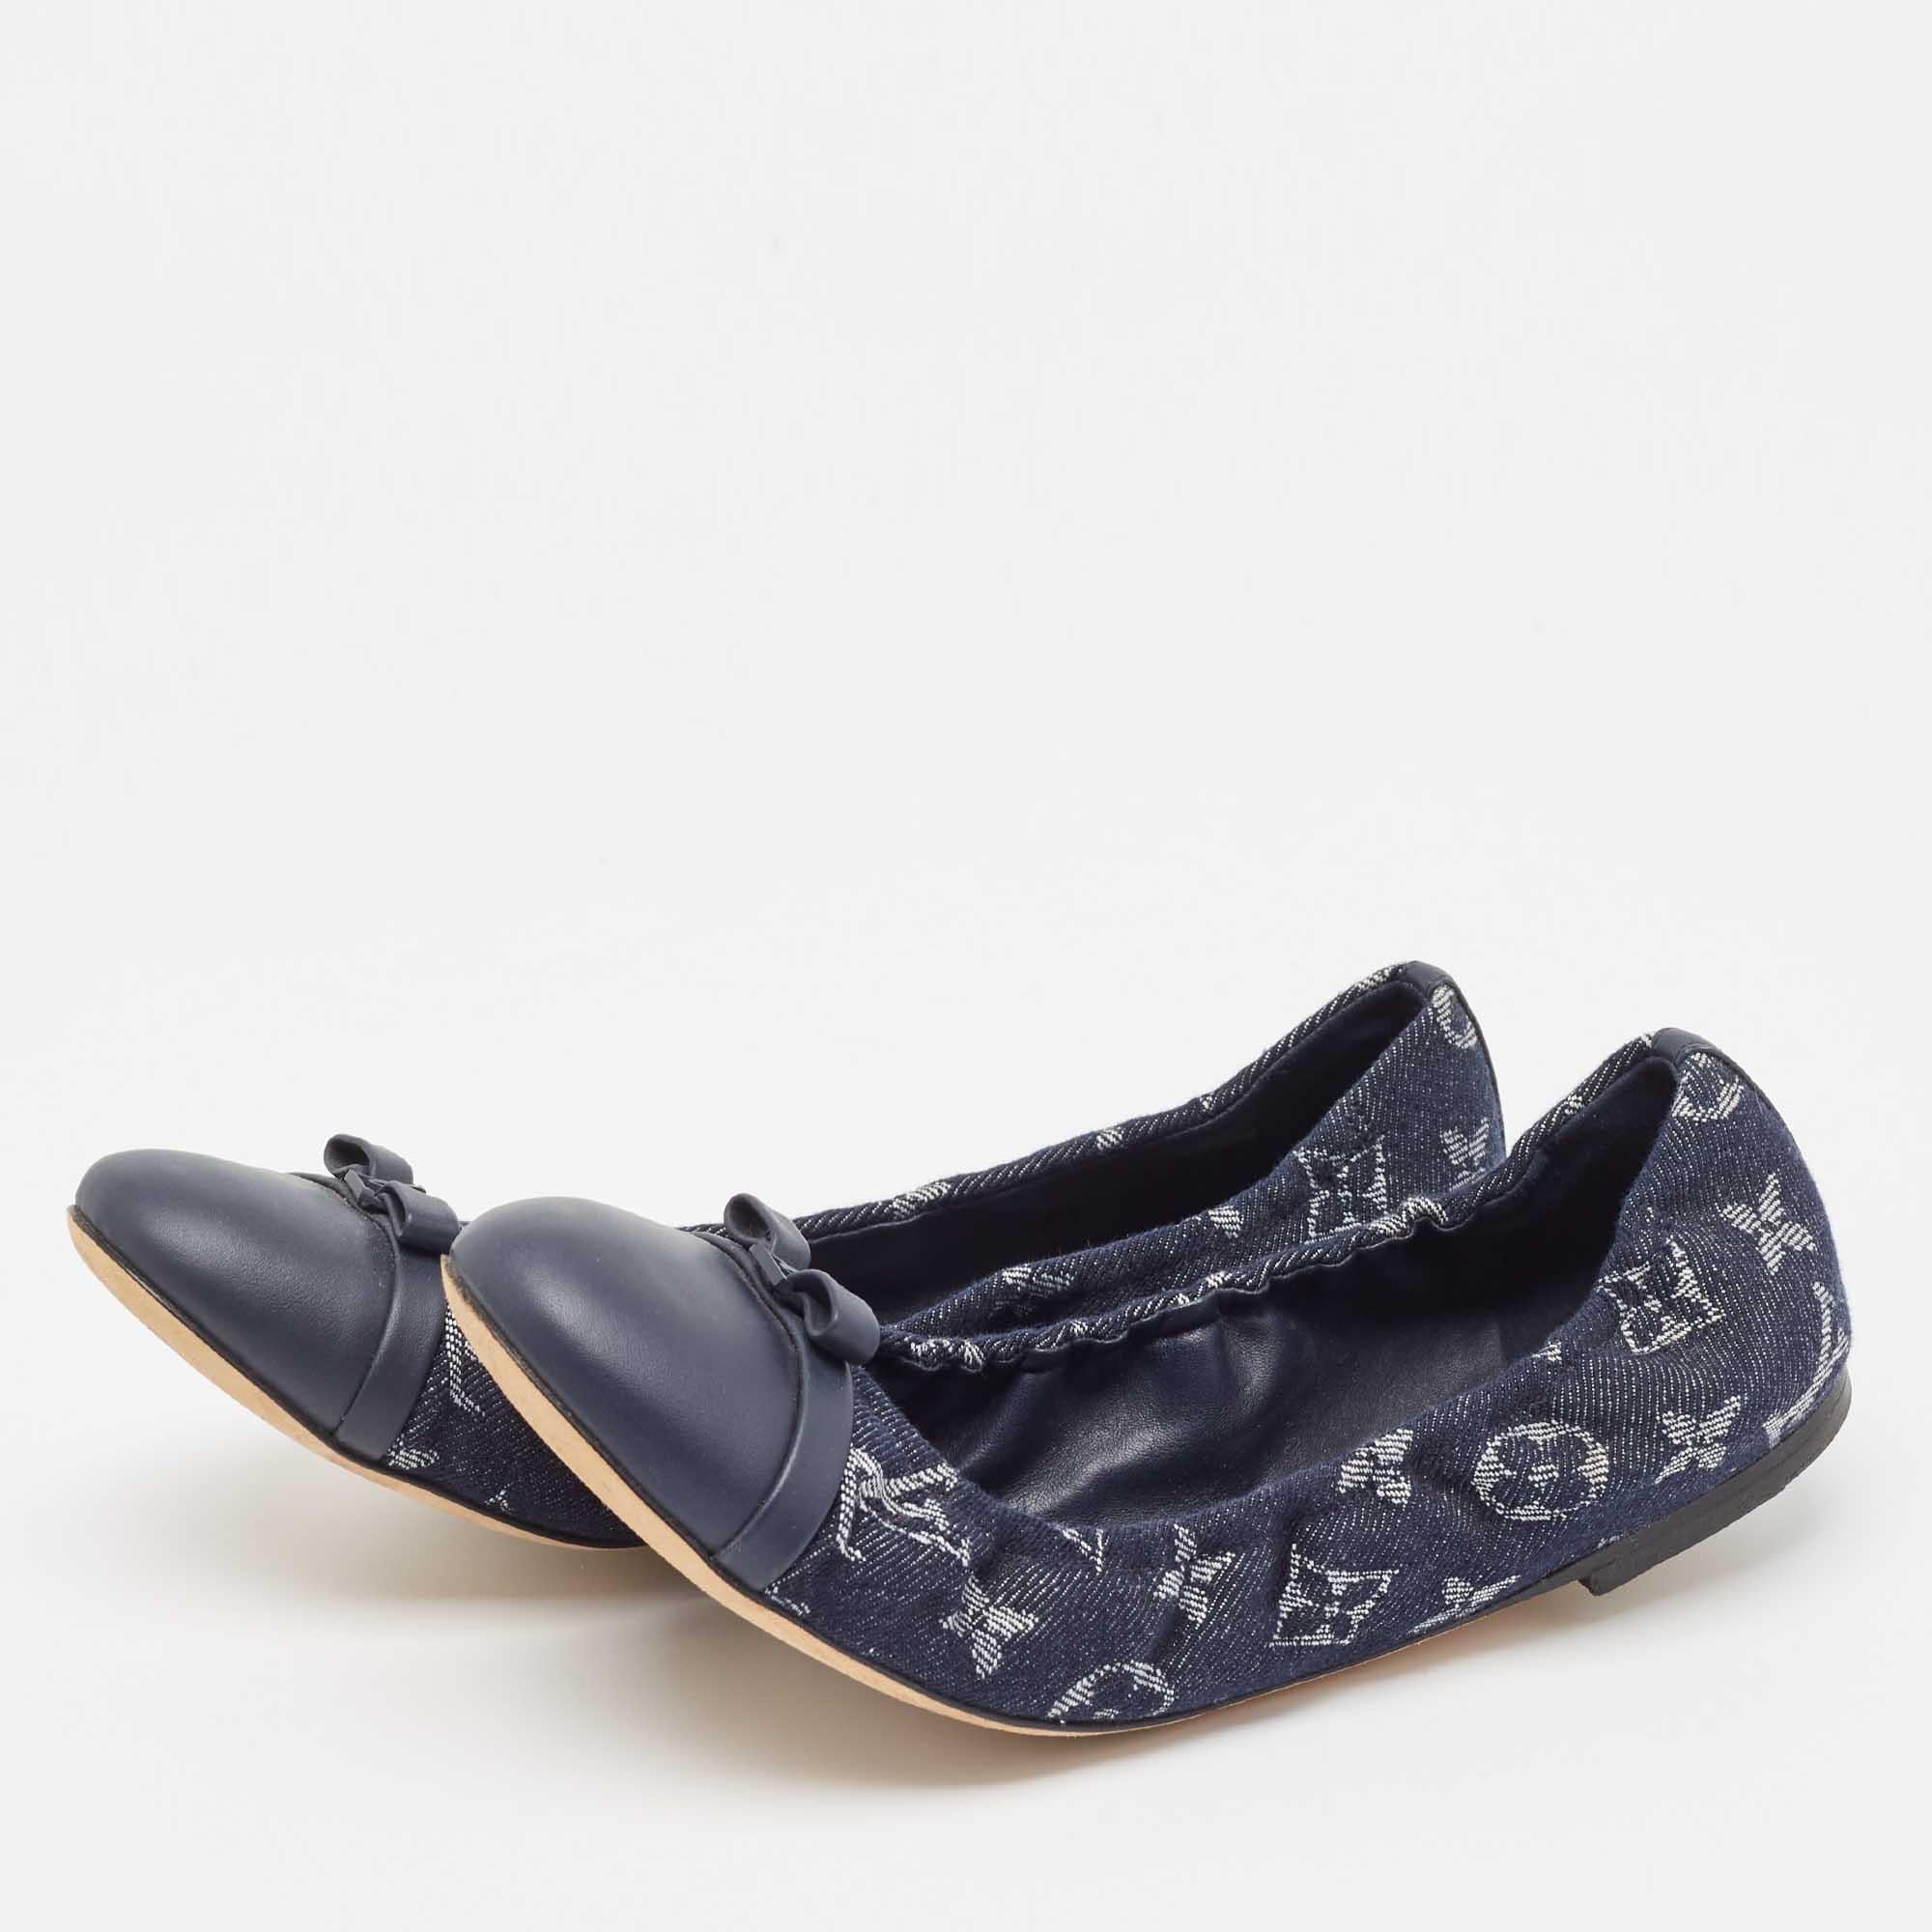 Complete your look by adding these designer ballet flats to your lovely wardrobe. They are crafted skilfully to grant the perfect fit and style.

